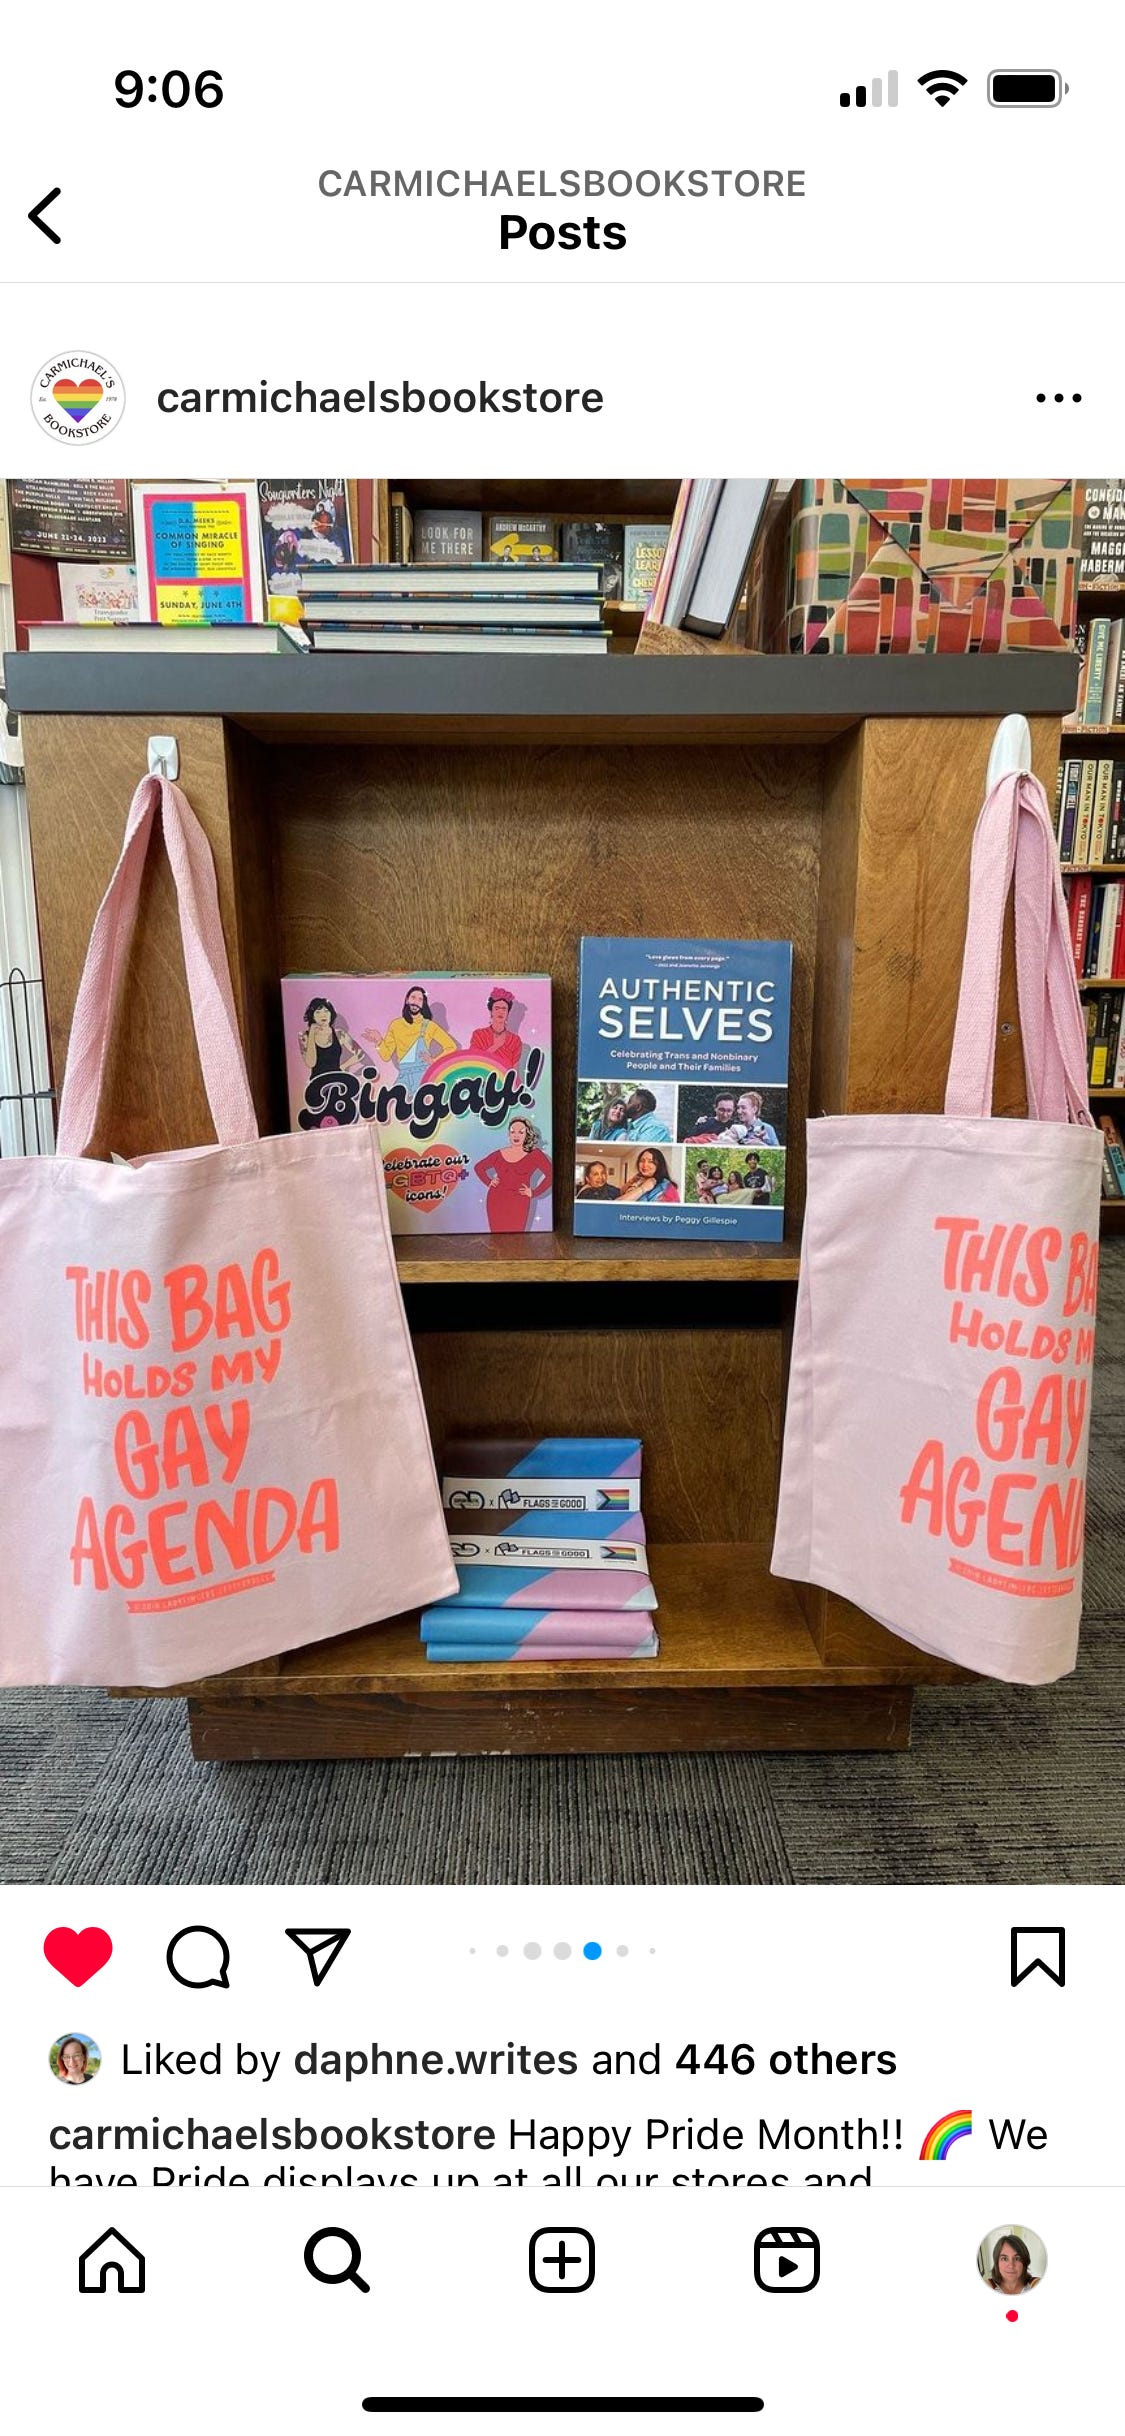 Pride book display with pink bags that say, "This bag holds my gay agenda."